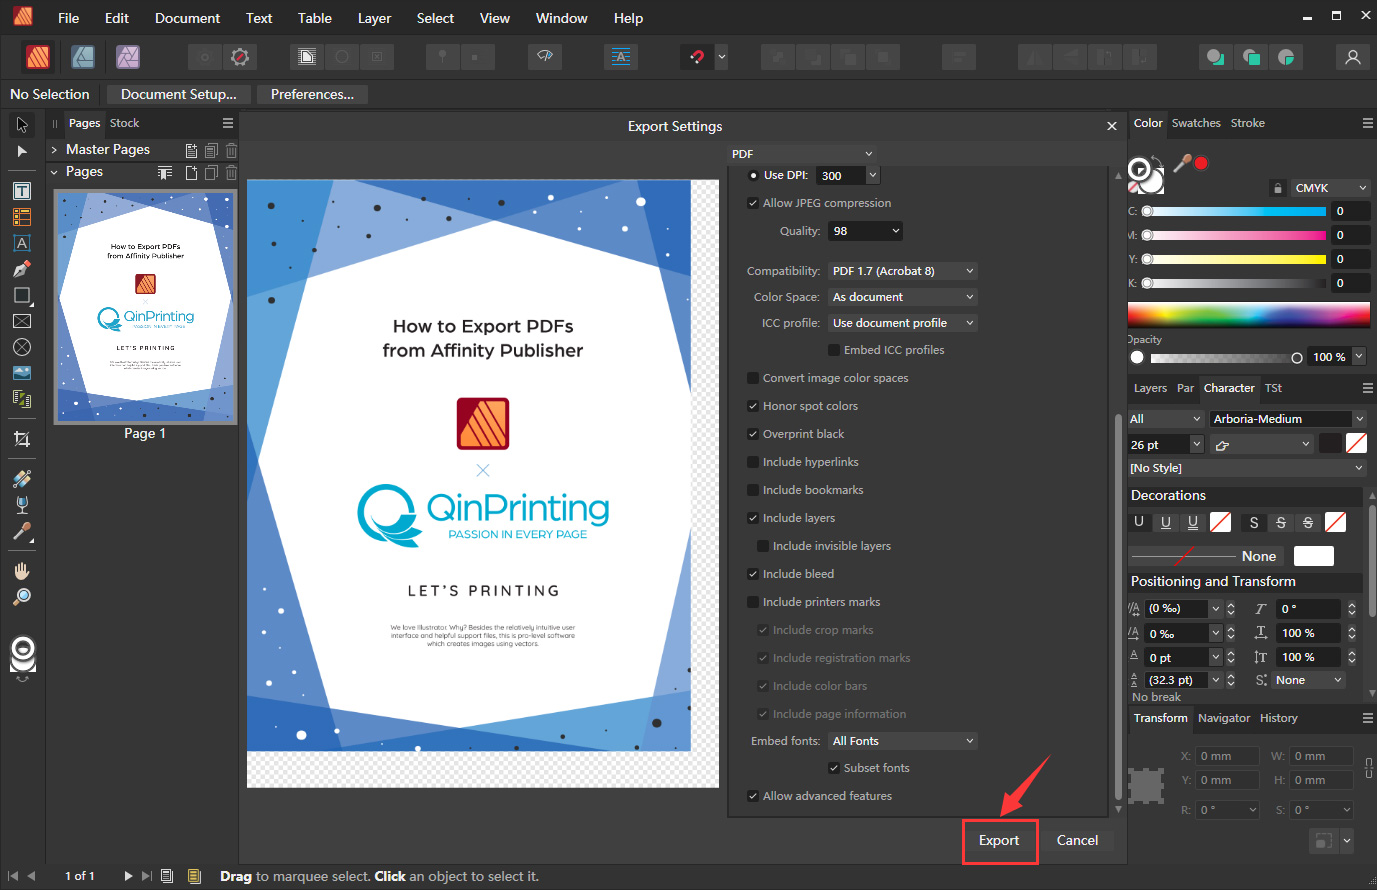 How to Export PDFs from Affinity Publisher Step 4